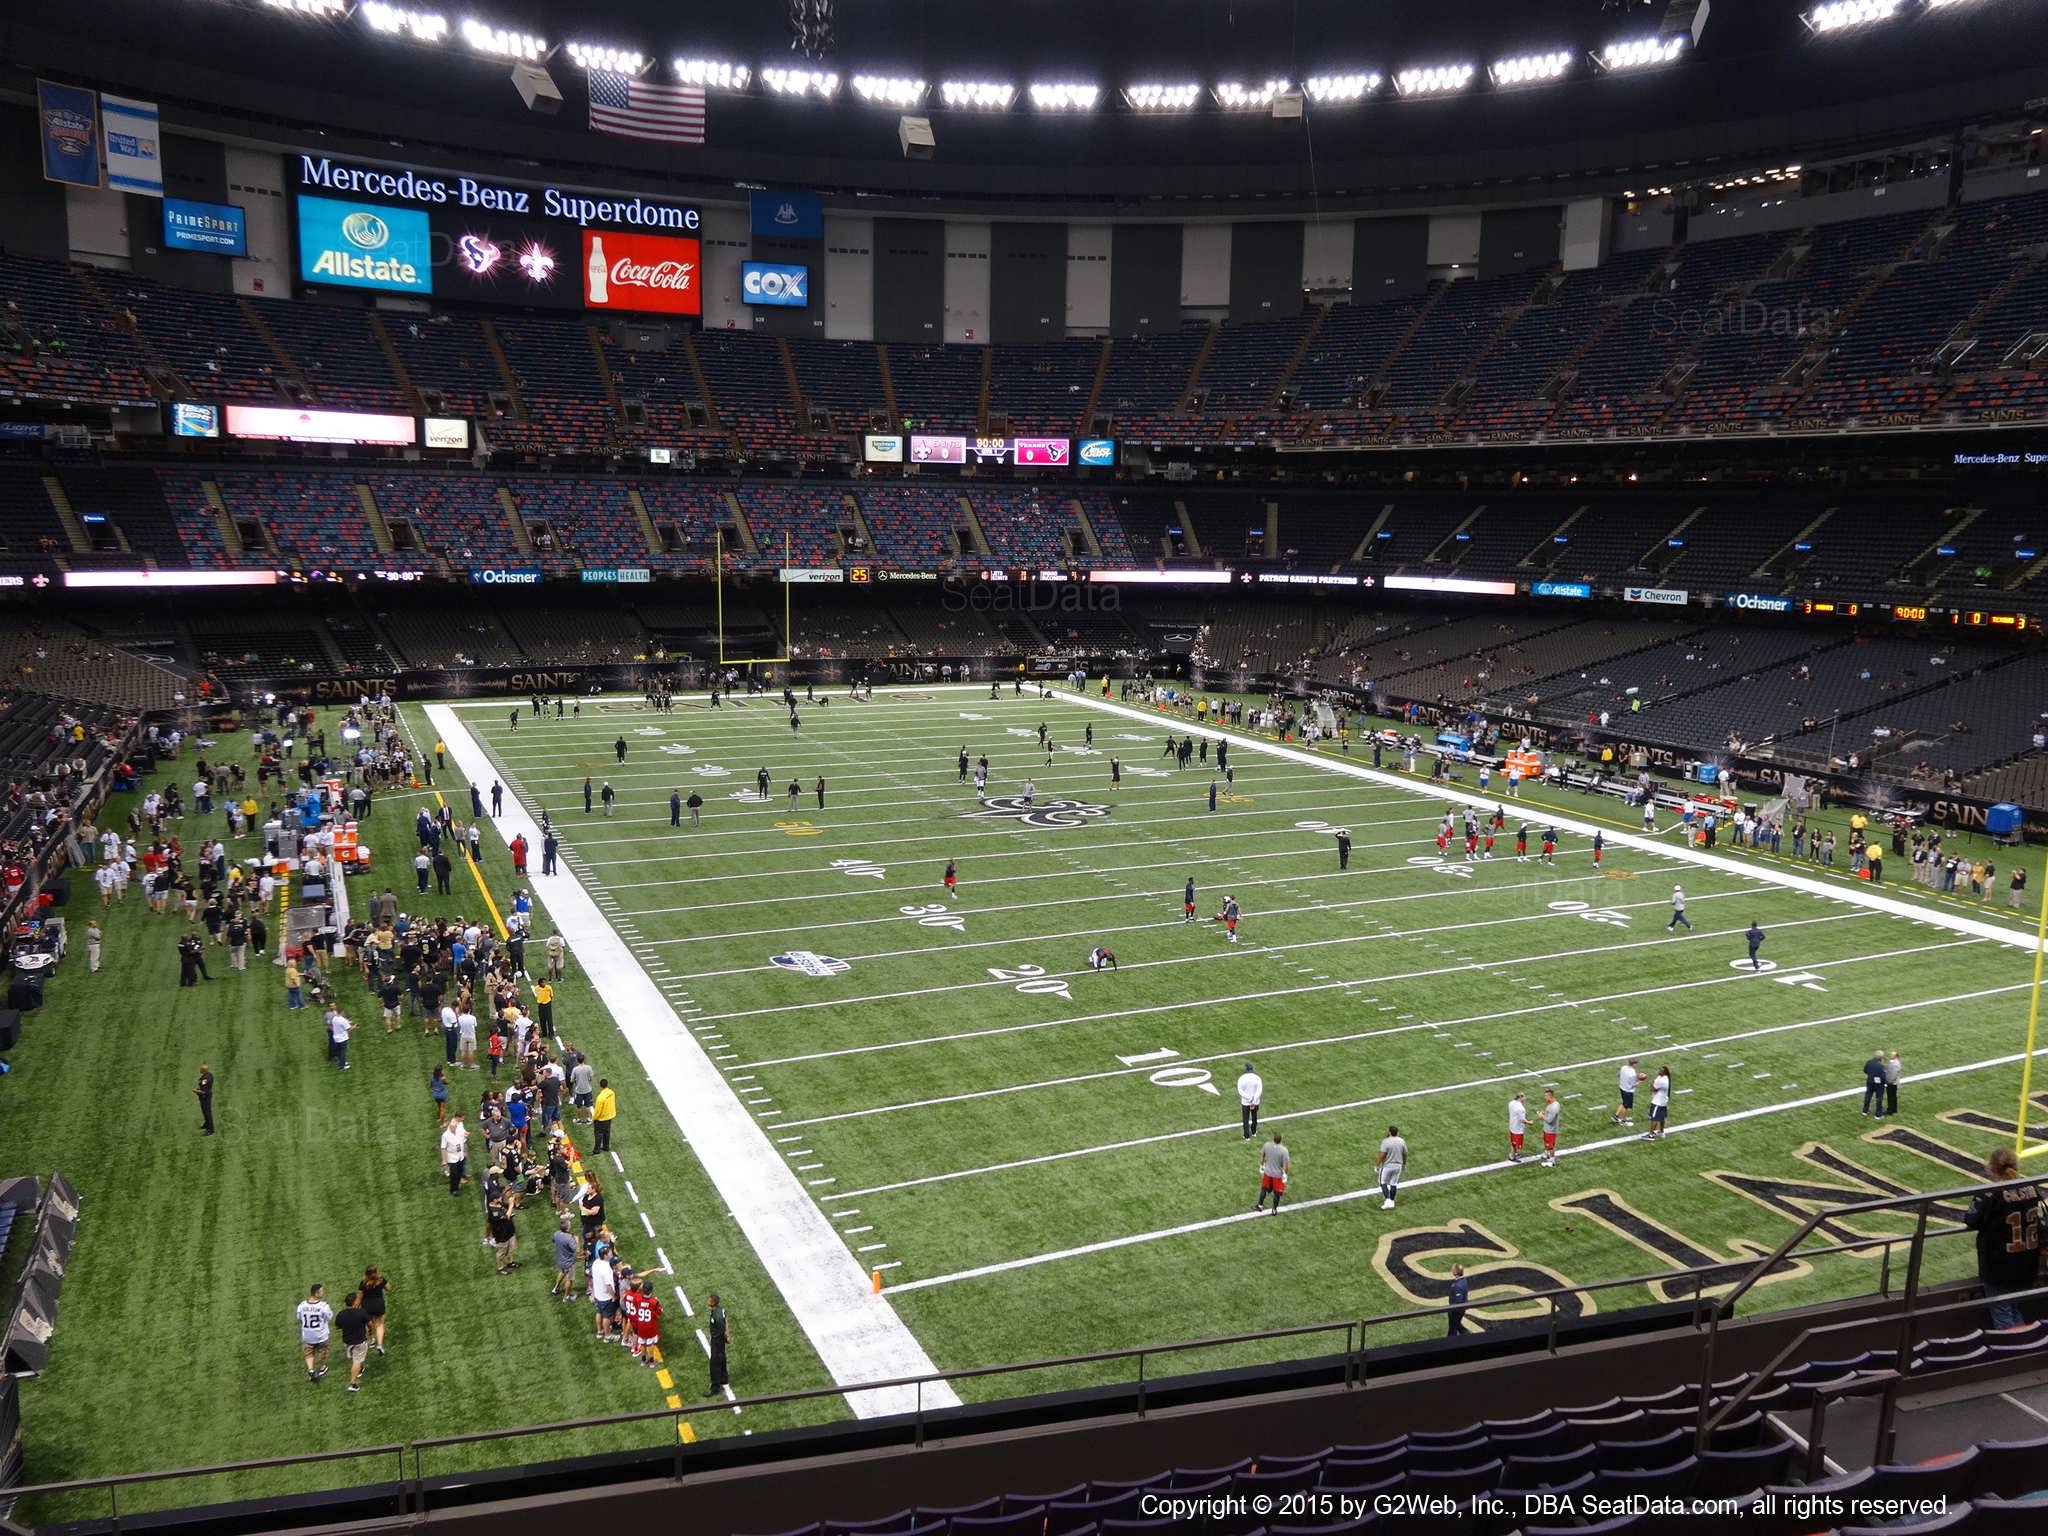 Seat view from section 303 at the Mercedes-Benz Superdome, home of the New Orleans Saints